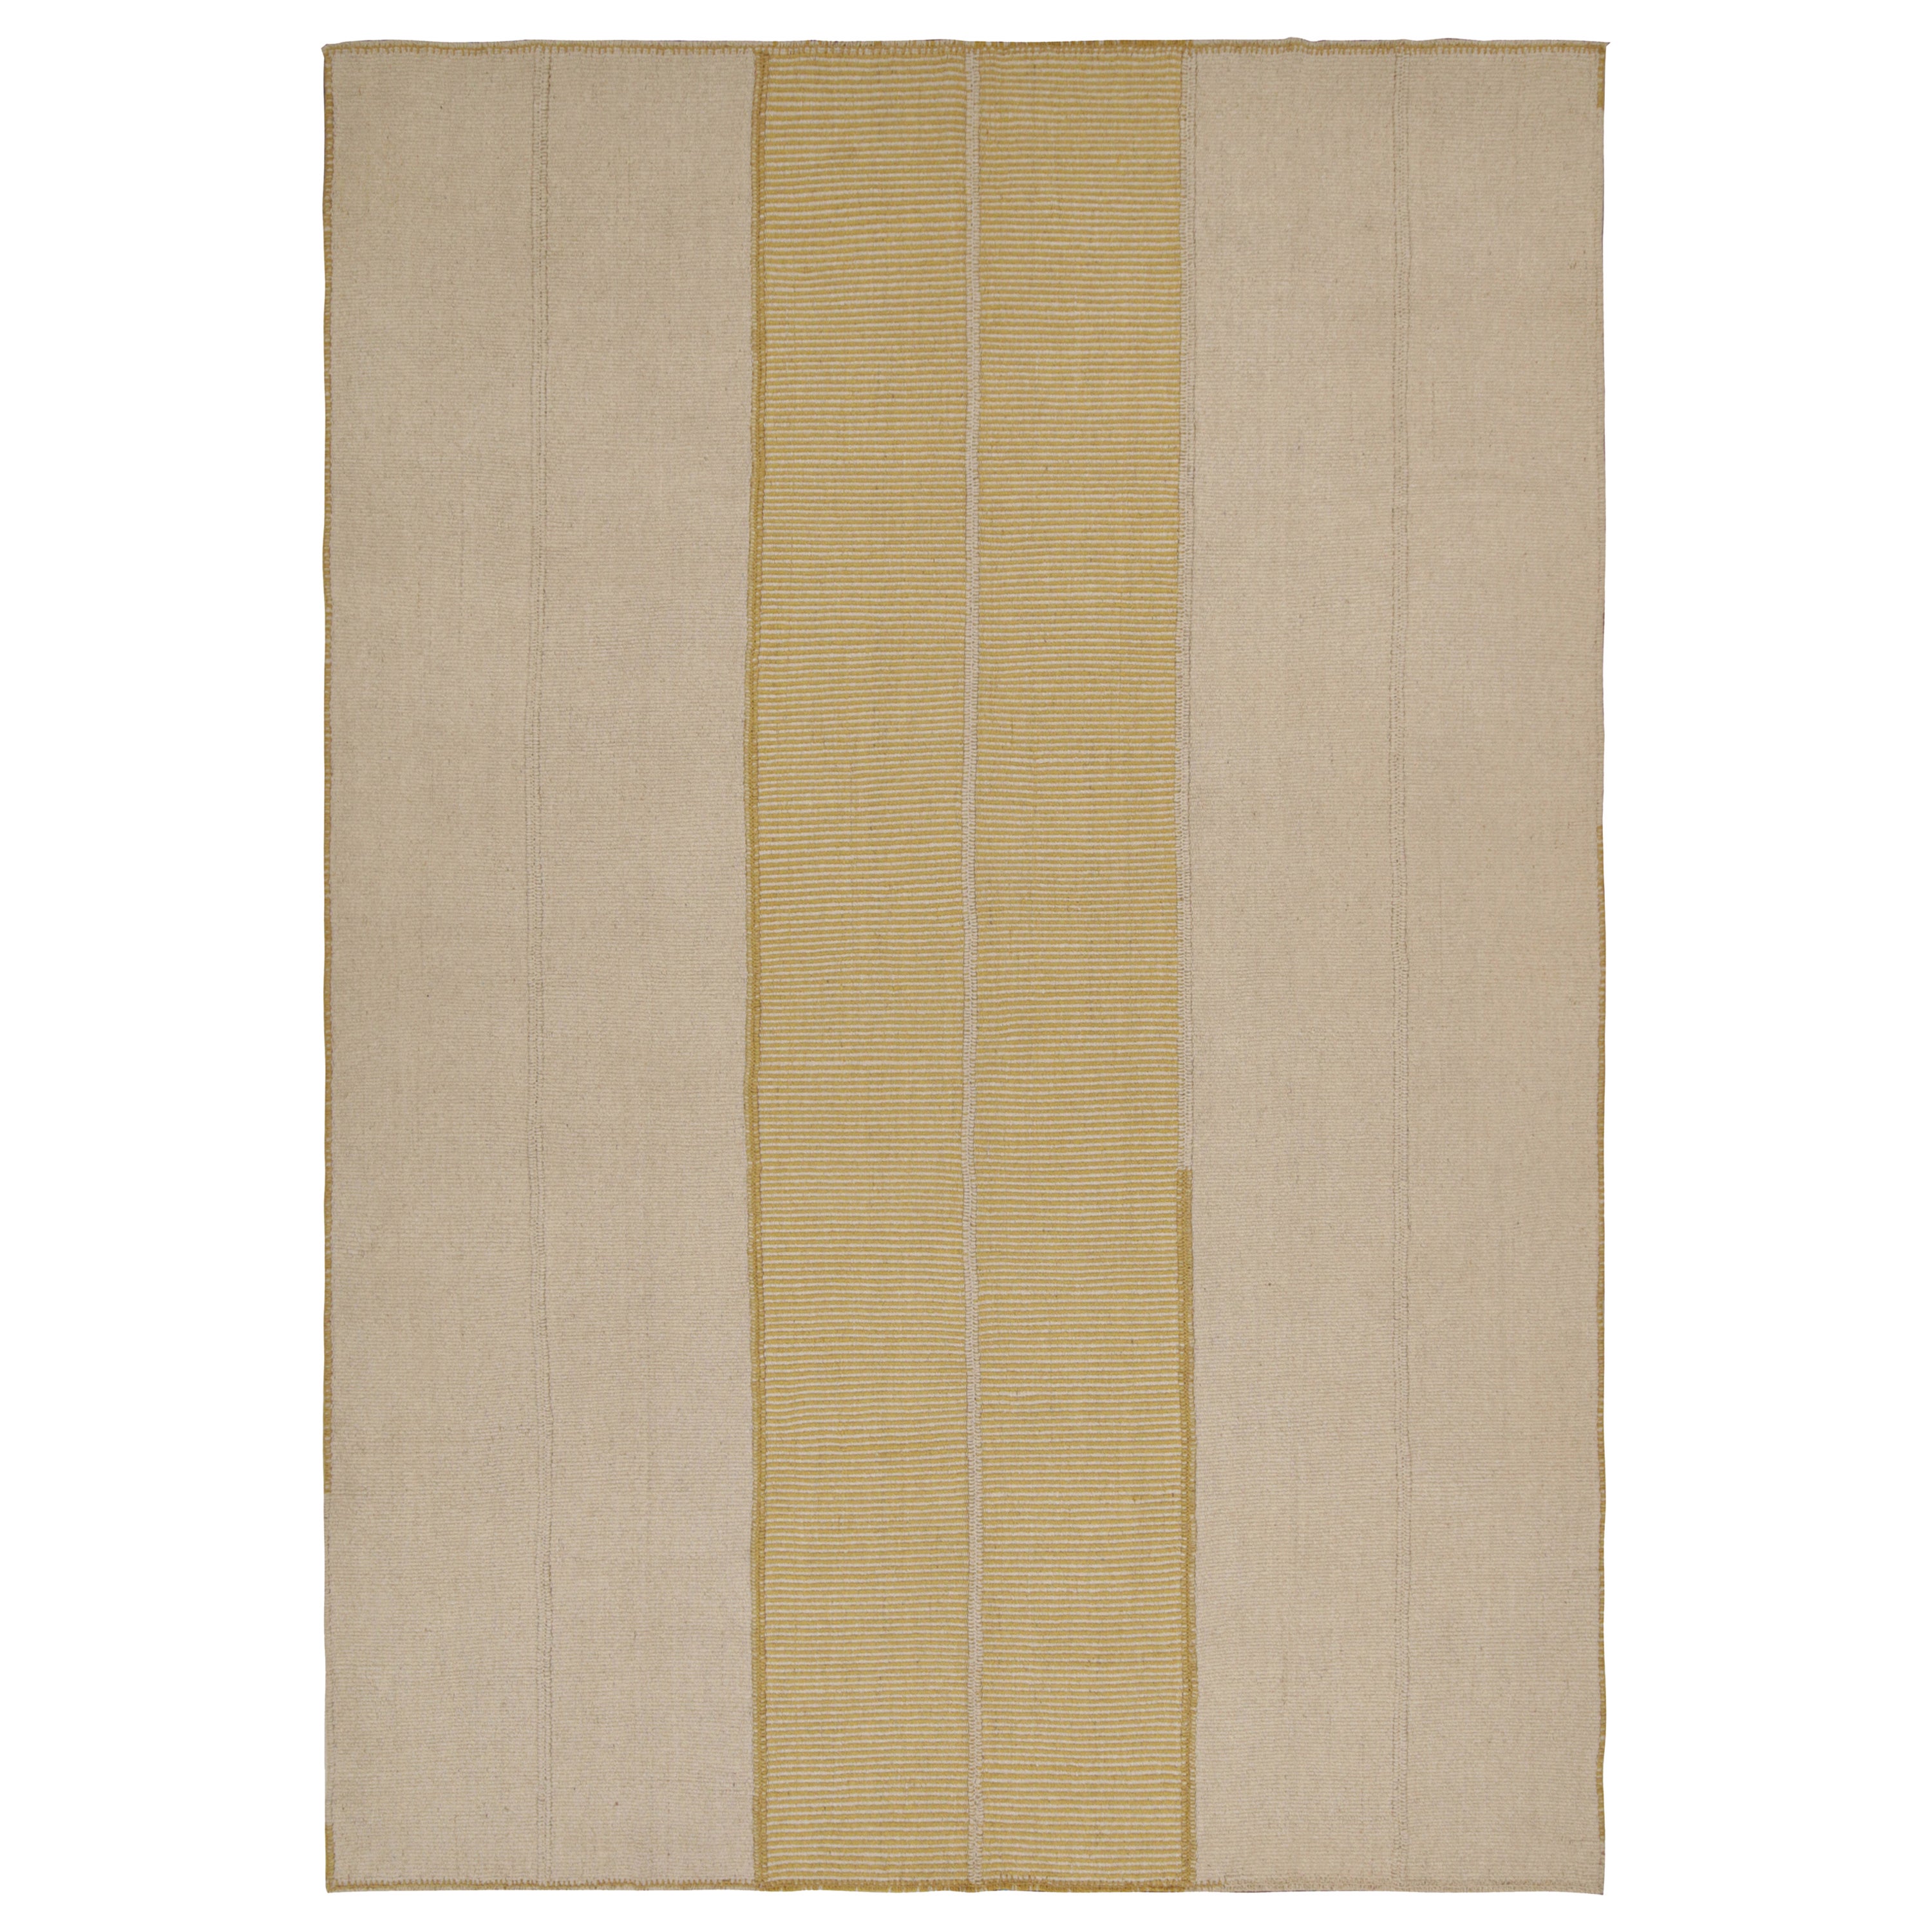 Rug & Kilim’s Contemporary Kilim in Beige and Gold Stripes